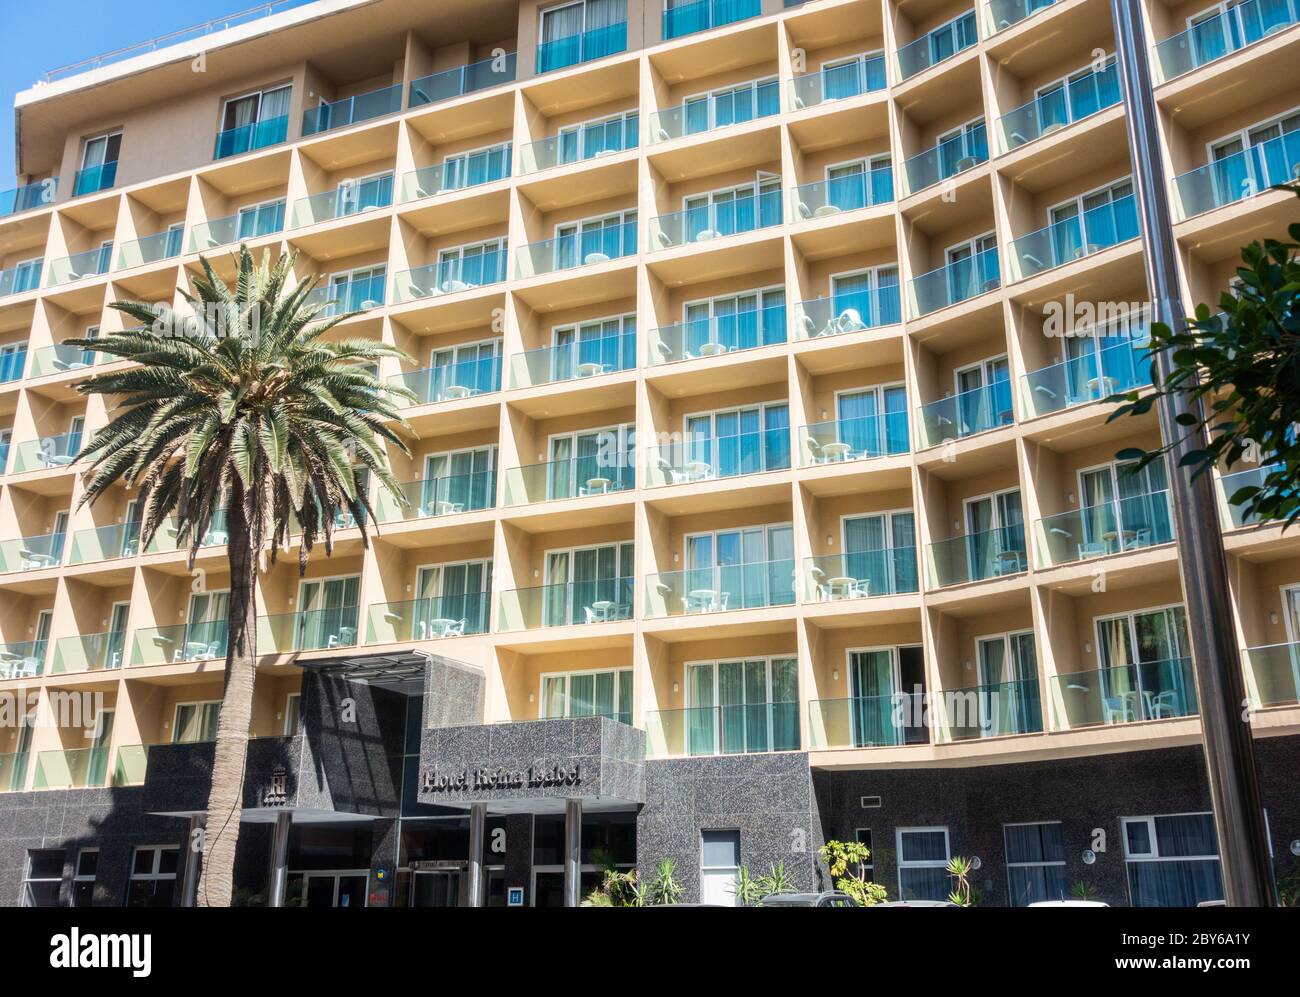 Las Palmas, Gran Canaria, Canary Islands, Spain. 9th June, 2020. The closed  4 star Reina Isabel (Queen Elizabeth) hotel overlooking a tourist free city  beach in Las Palmas on Gran Canaria, which,